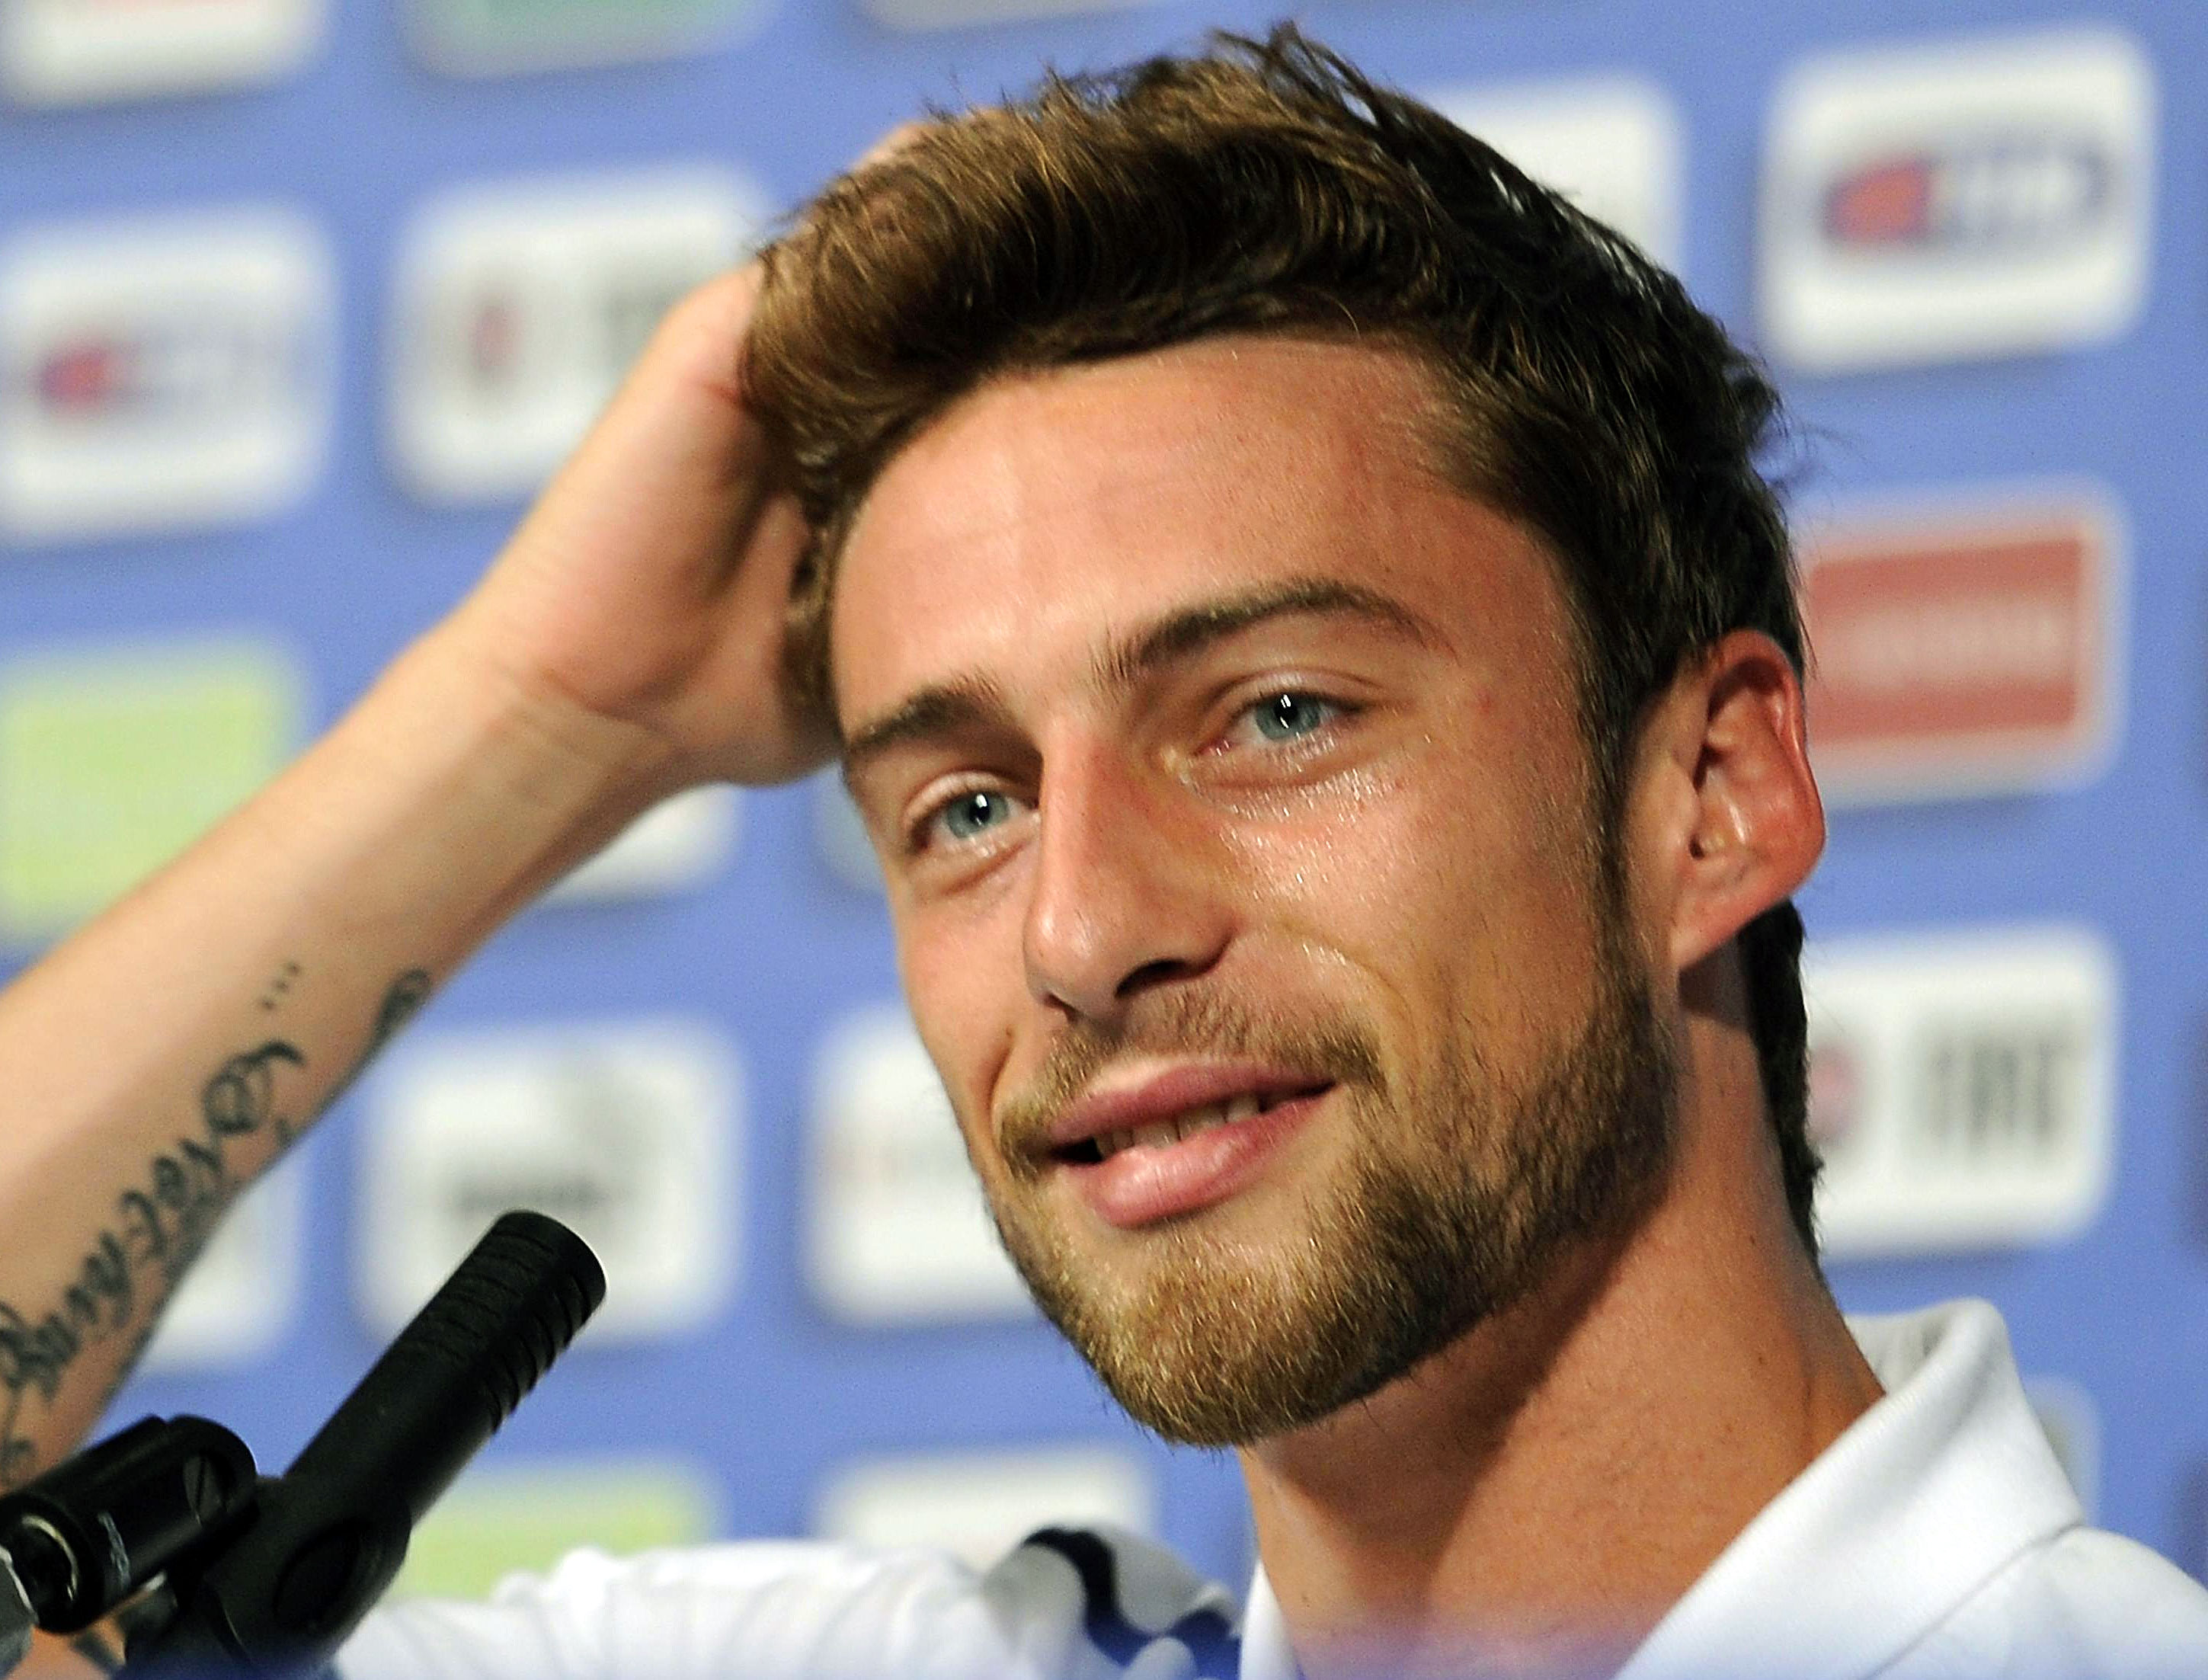 Marchisio: “We wanted to win, but a draw is ok.”